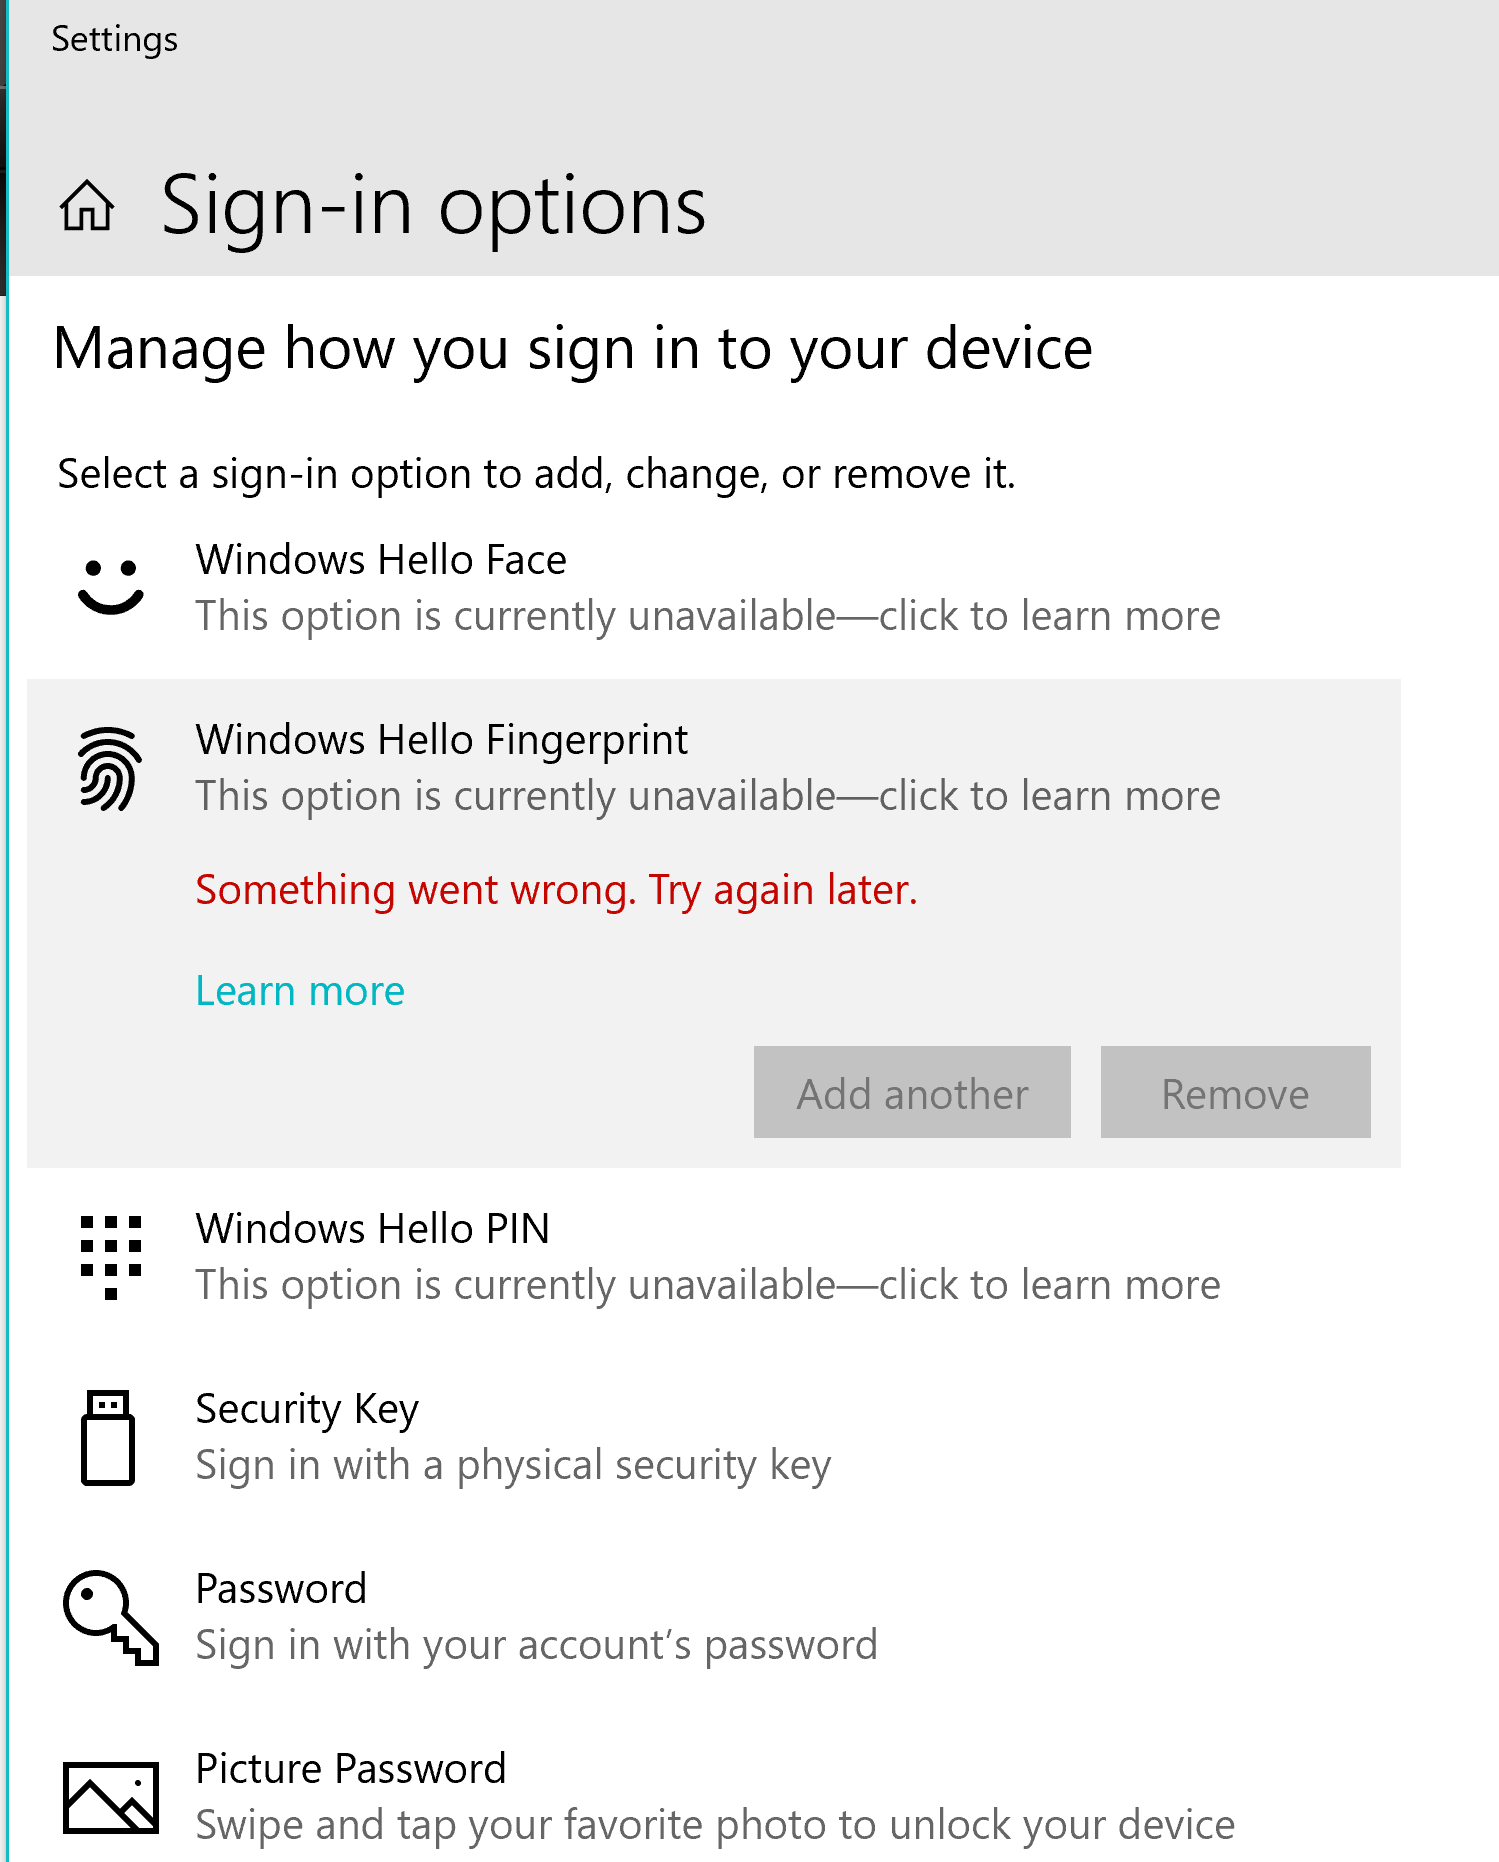 Windows Hello -This option is currently unavailable ca35db02-ceb5-4208-946c-7e9827d35519?upload=true.png